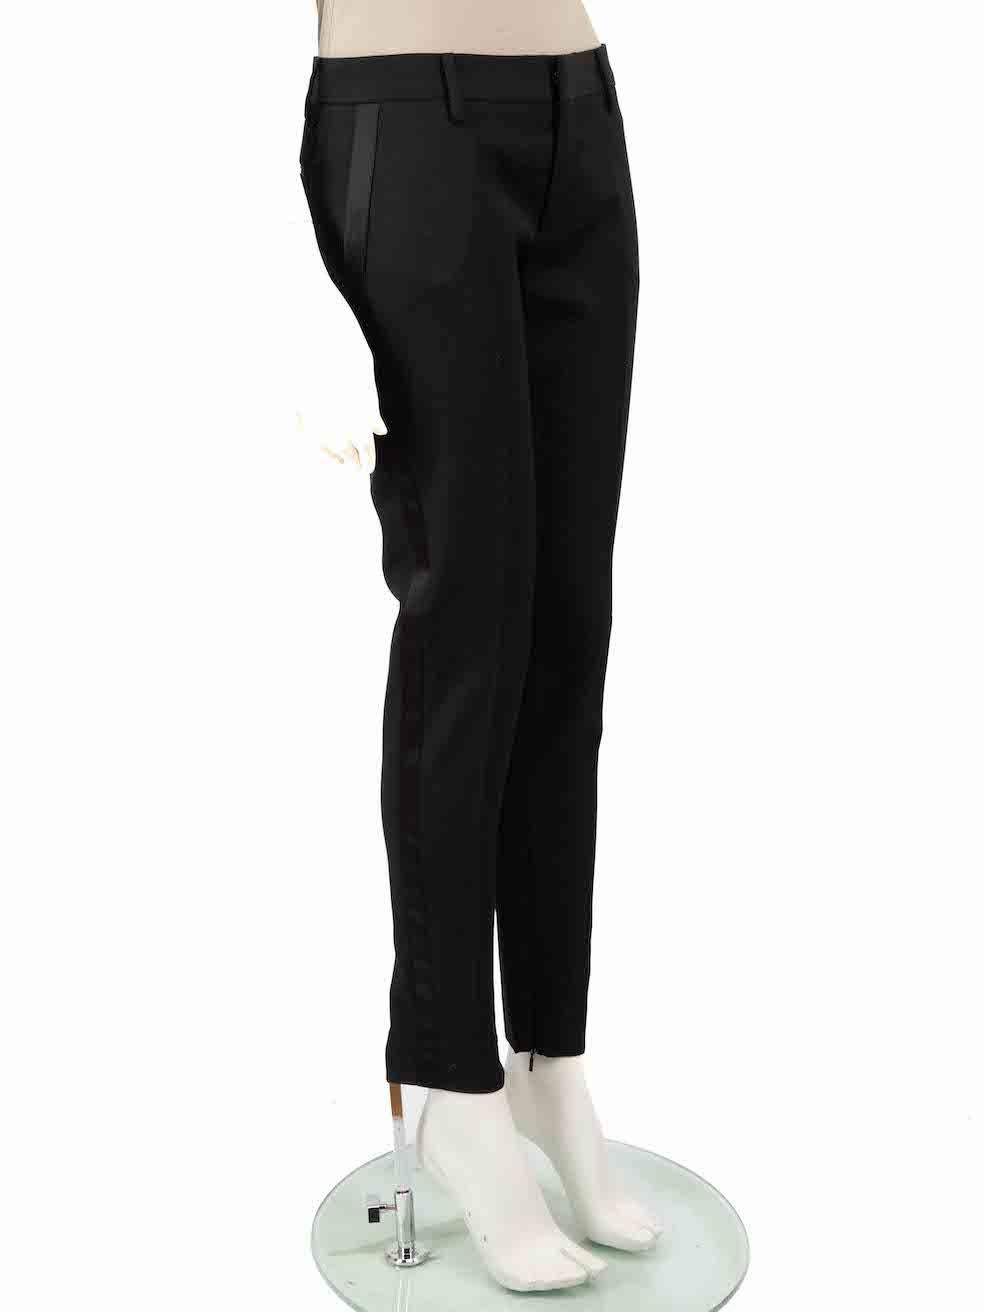 CONDITION is Very good. Hardly any visible wear to trousers is evident on this used Saint Laurent designer resale item.
 
 
 
 Details
 
 
 Black
 
 Wool
 
 Trousers
 
 Slim fit
 
 Satin side tape detail
 
 Mid rise
 
 Zipped cuffs
 
 2x Side